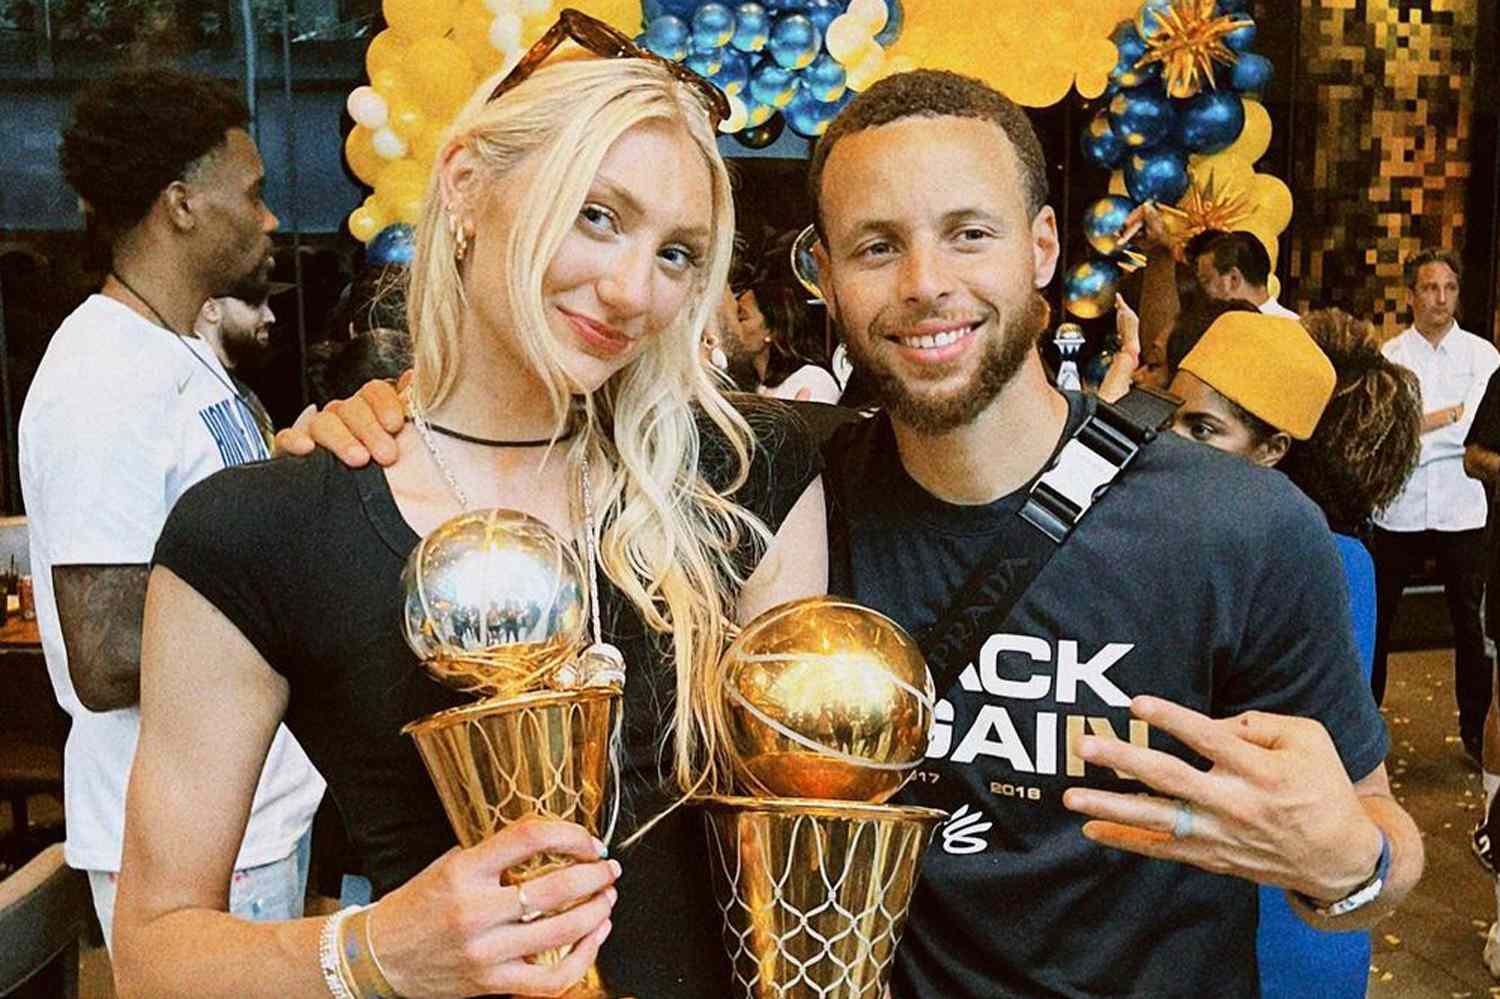 Is Cameron Brink Related to Stephen Curry? All About Their Relationship